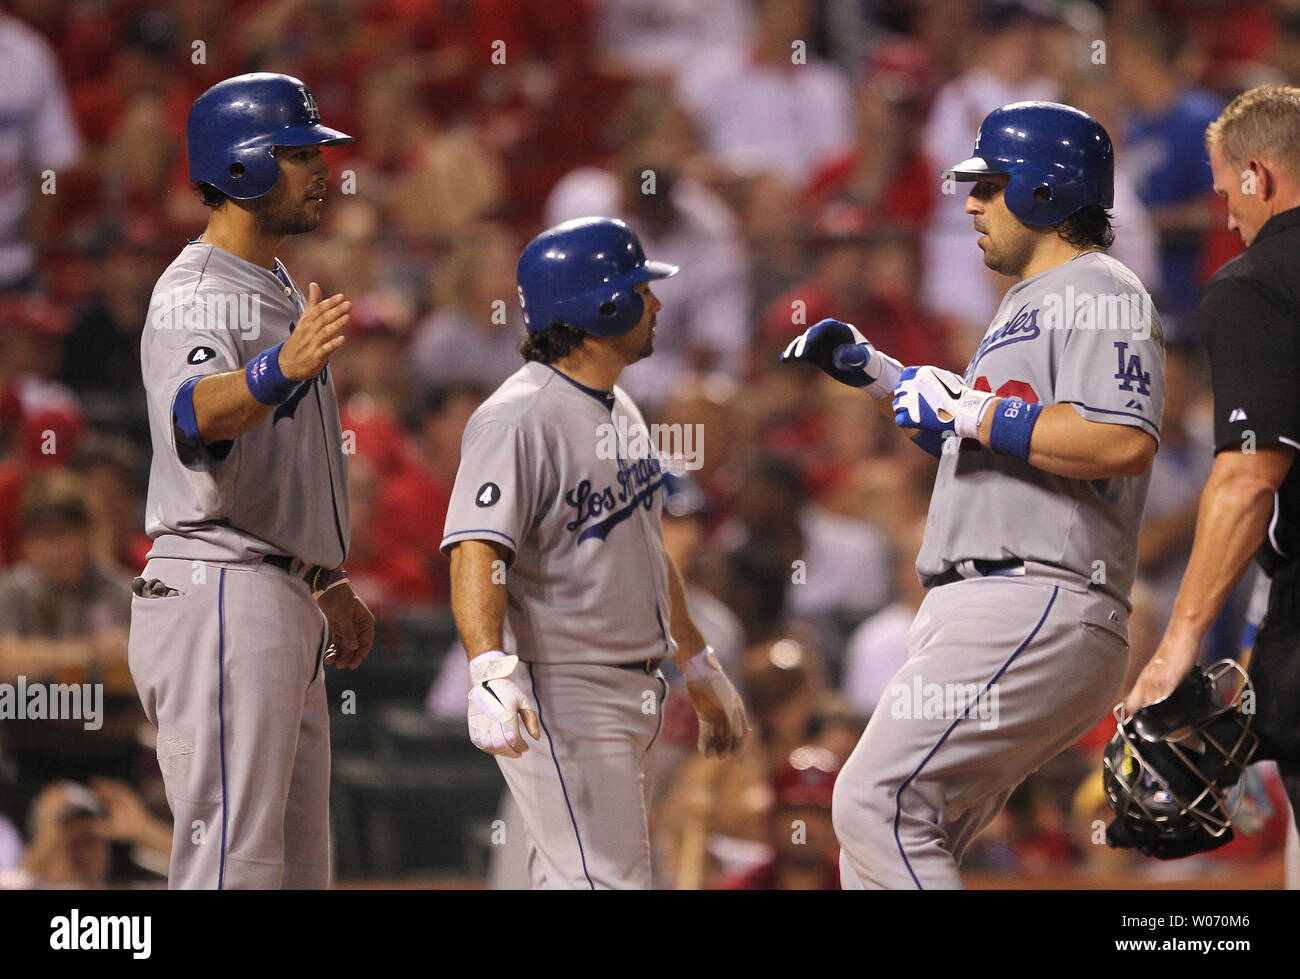 Los Angeles Dodgers Andre Ethier (L) and Aaron Miles (C) congratulate Rod Barajas after he hit a  three run home run in the fifth inning against the St. Louis Cardinals at Busch Stadium in St. Louis on August 23, 2011.  UPI/Bill Greenblatt Stock Photo